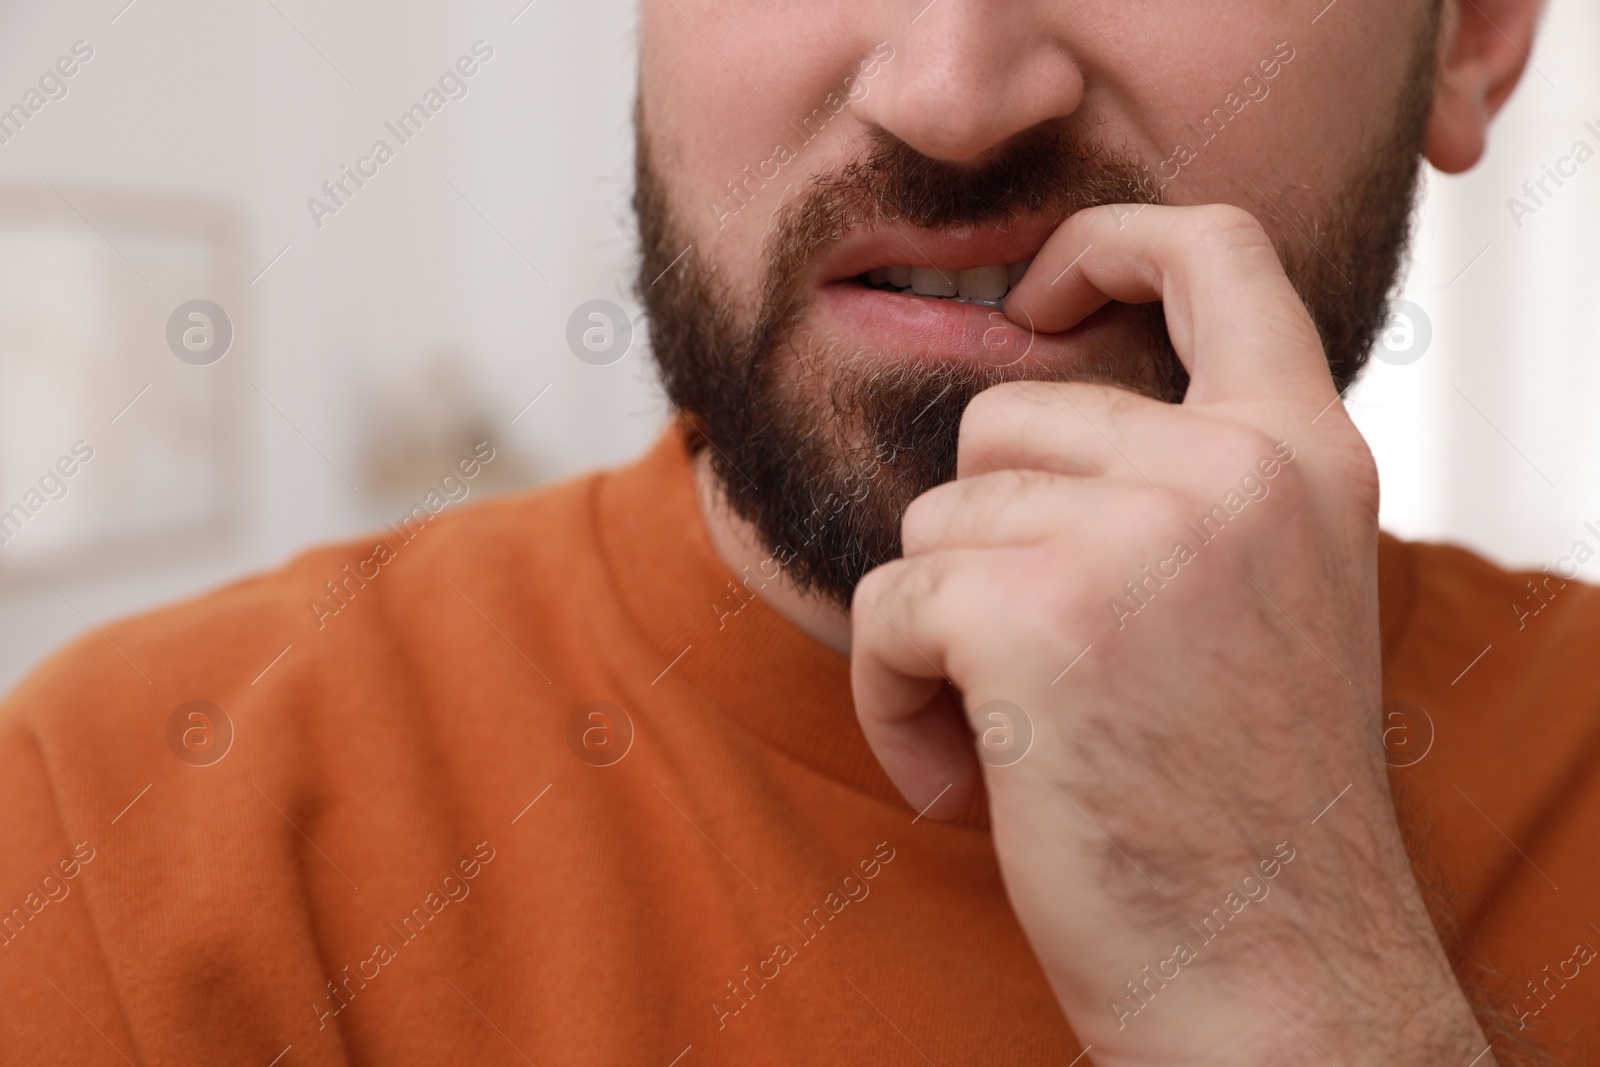 Photo of Man biting his nails on blurred background, closeup. Bad habit